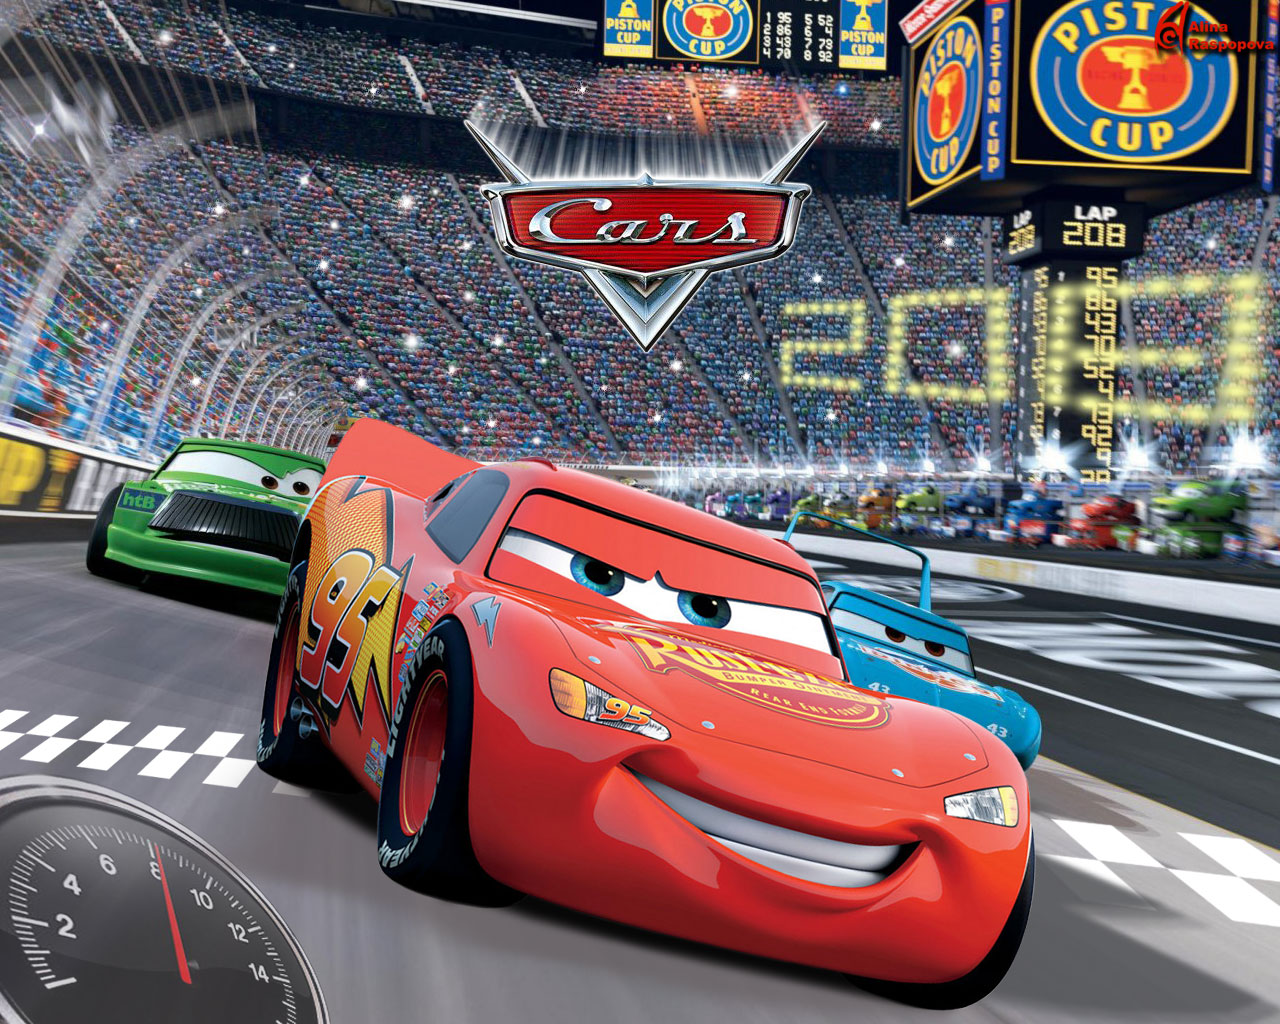 The Cars Movie Wallpaper For Top Desktop No